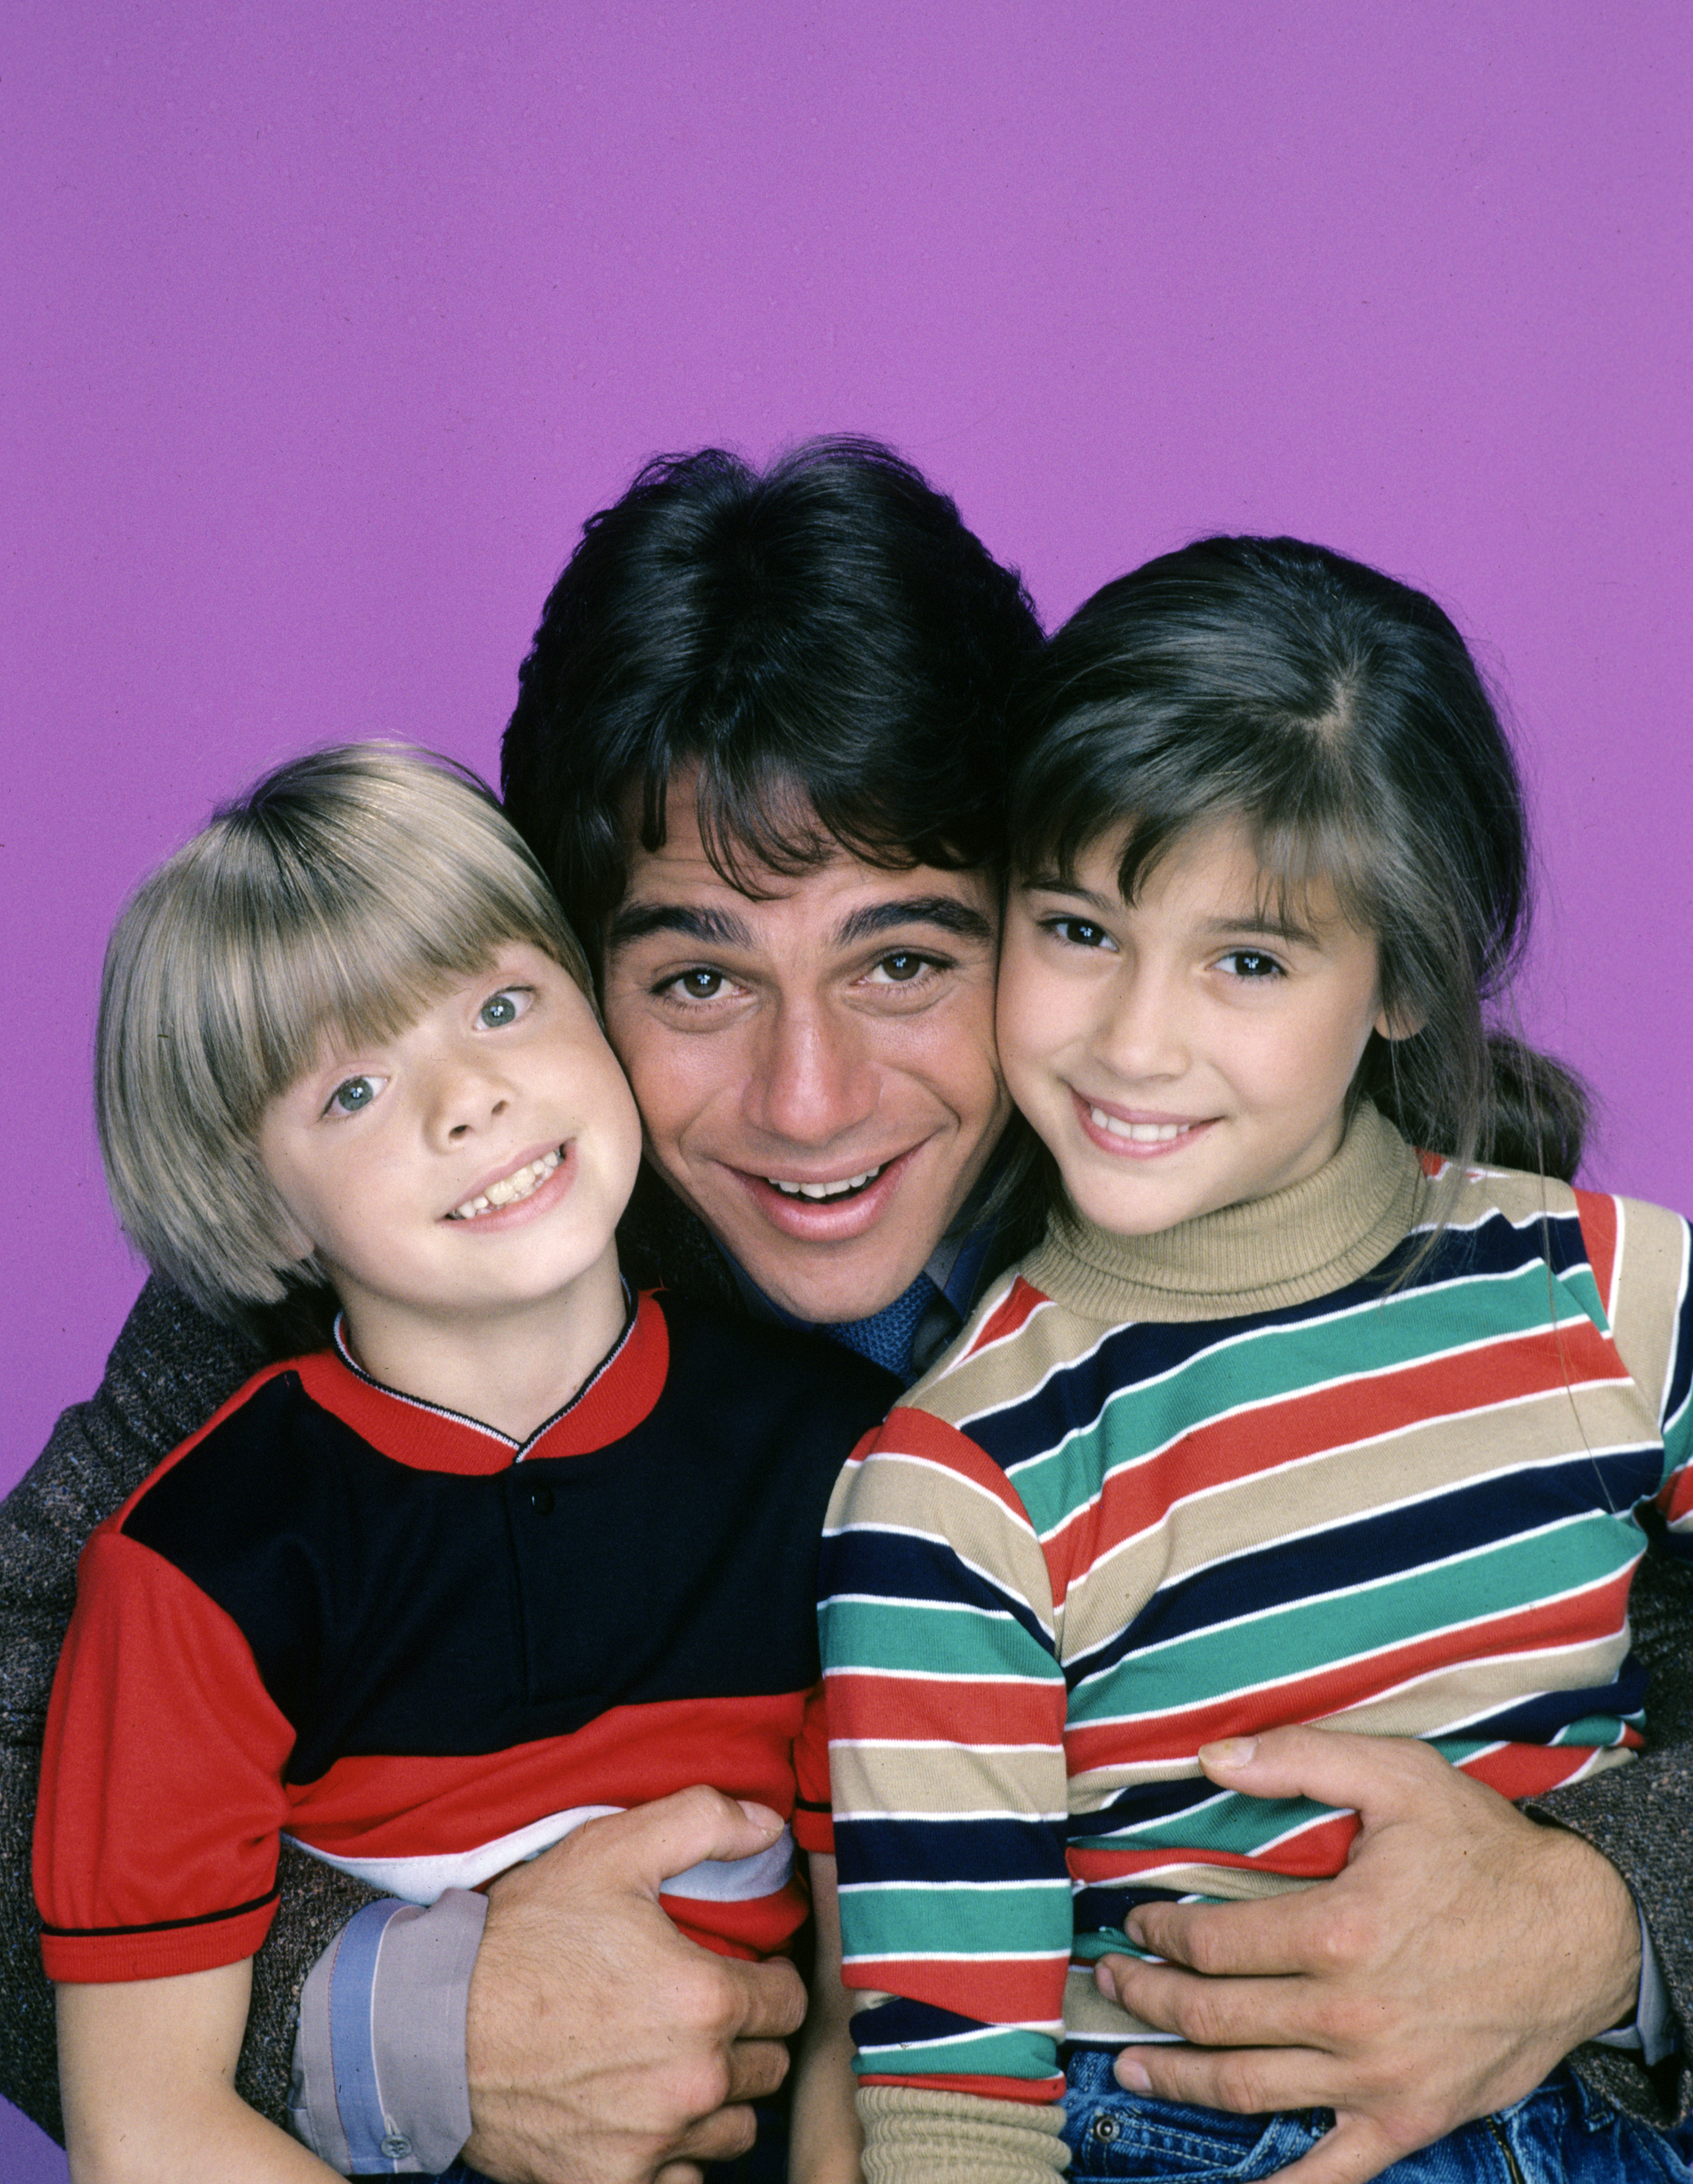 Tony Danza, Alyssa Milano, and Danny Pintauro on "Who's the Boss?" September 20, 1984 | Source: Getty Images